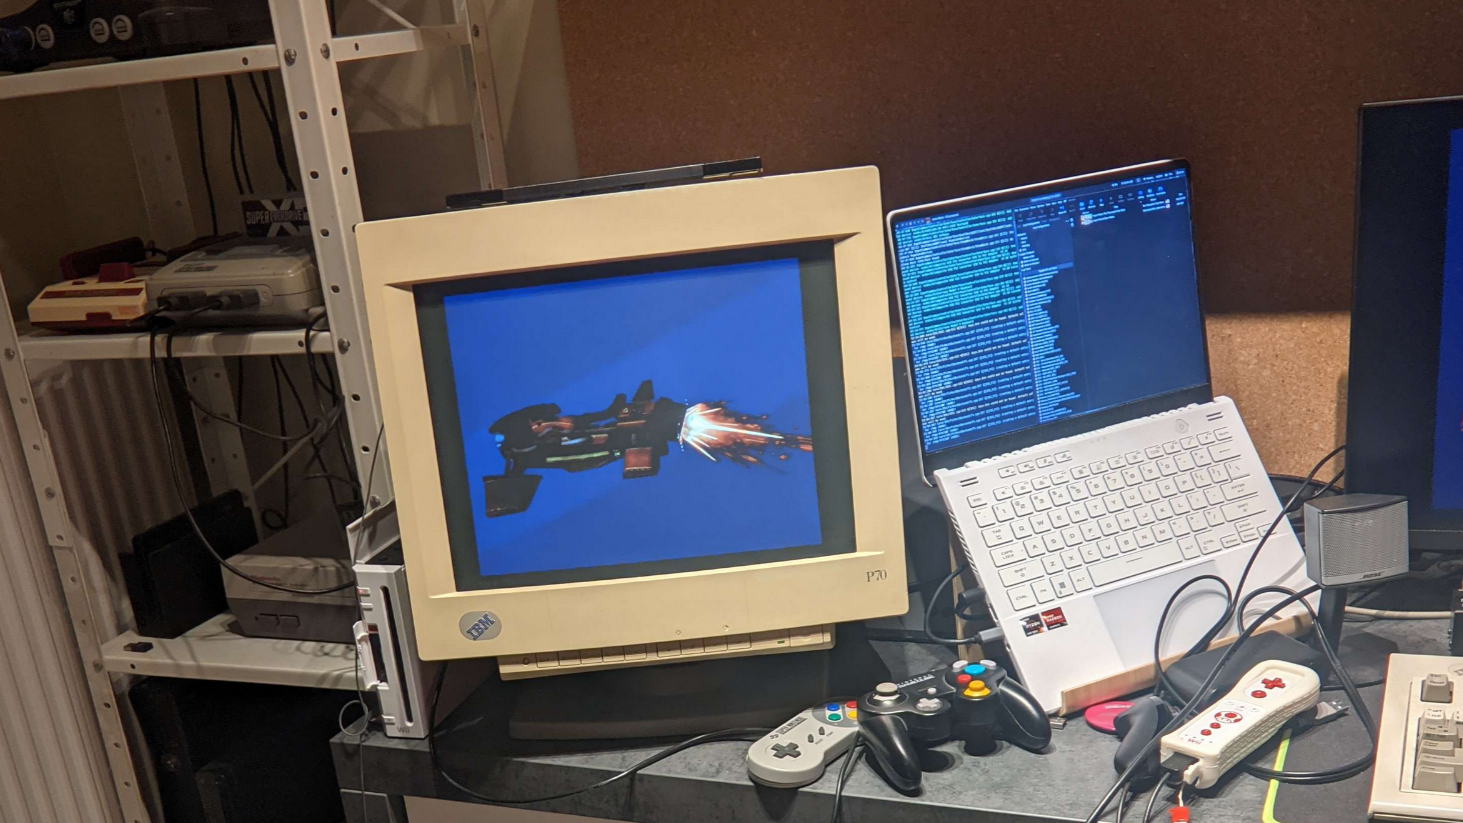 A picture of a messy table with a Wiimote and GameCube controller, with a CRT hooked up to an offscreen GameCube showing a vehicle with a fire effect behind it